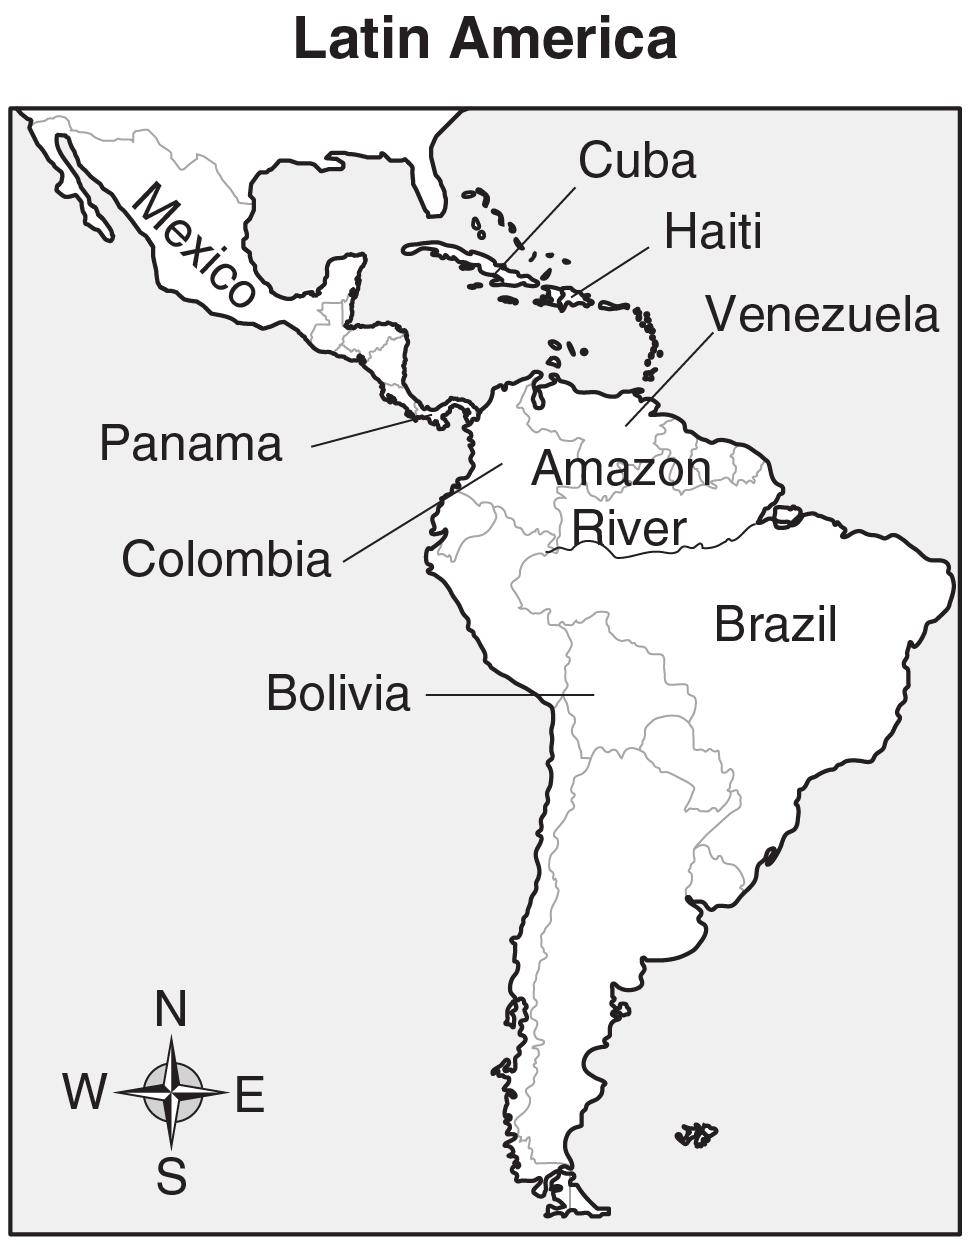 Unit 5: Latin America Today In this unit, you will turn your attention to Latin America. You will study the geography of some Latin American countries.